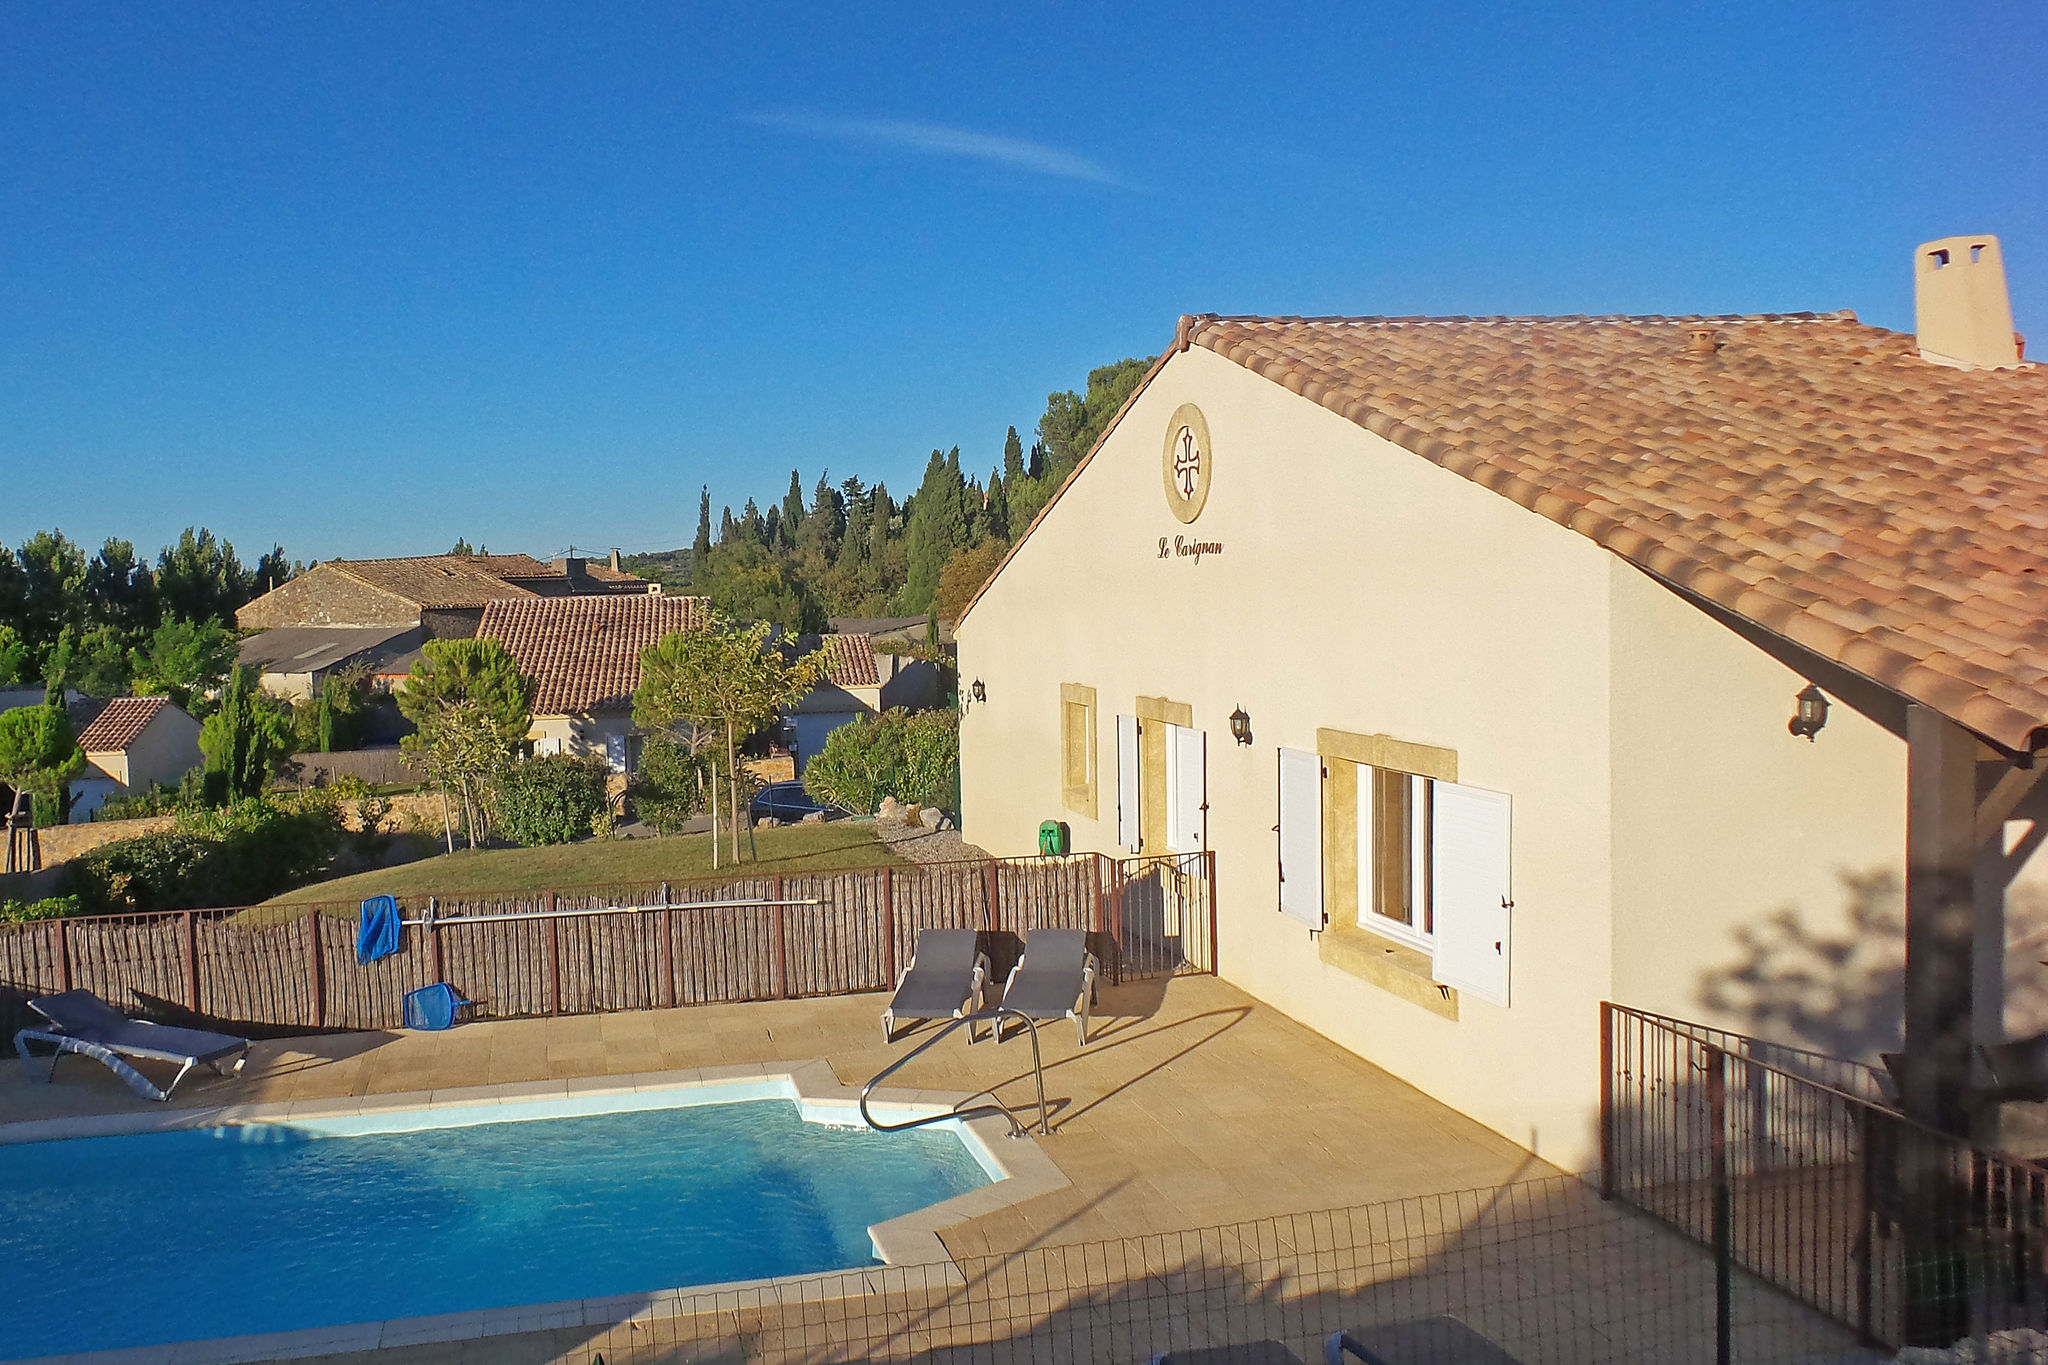 Villa with air-con, heated pool, jacuzzi, fenced garden and kids play equipment